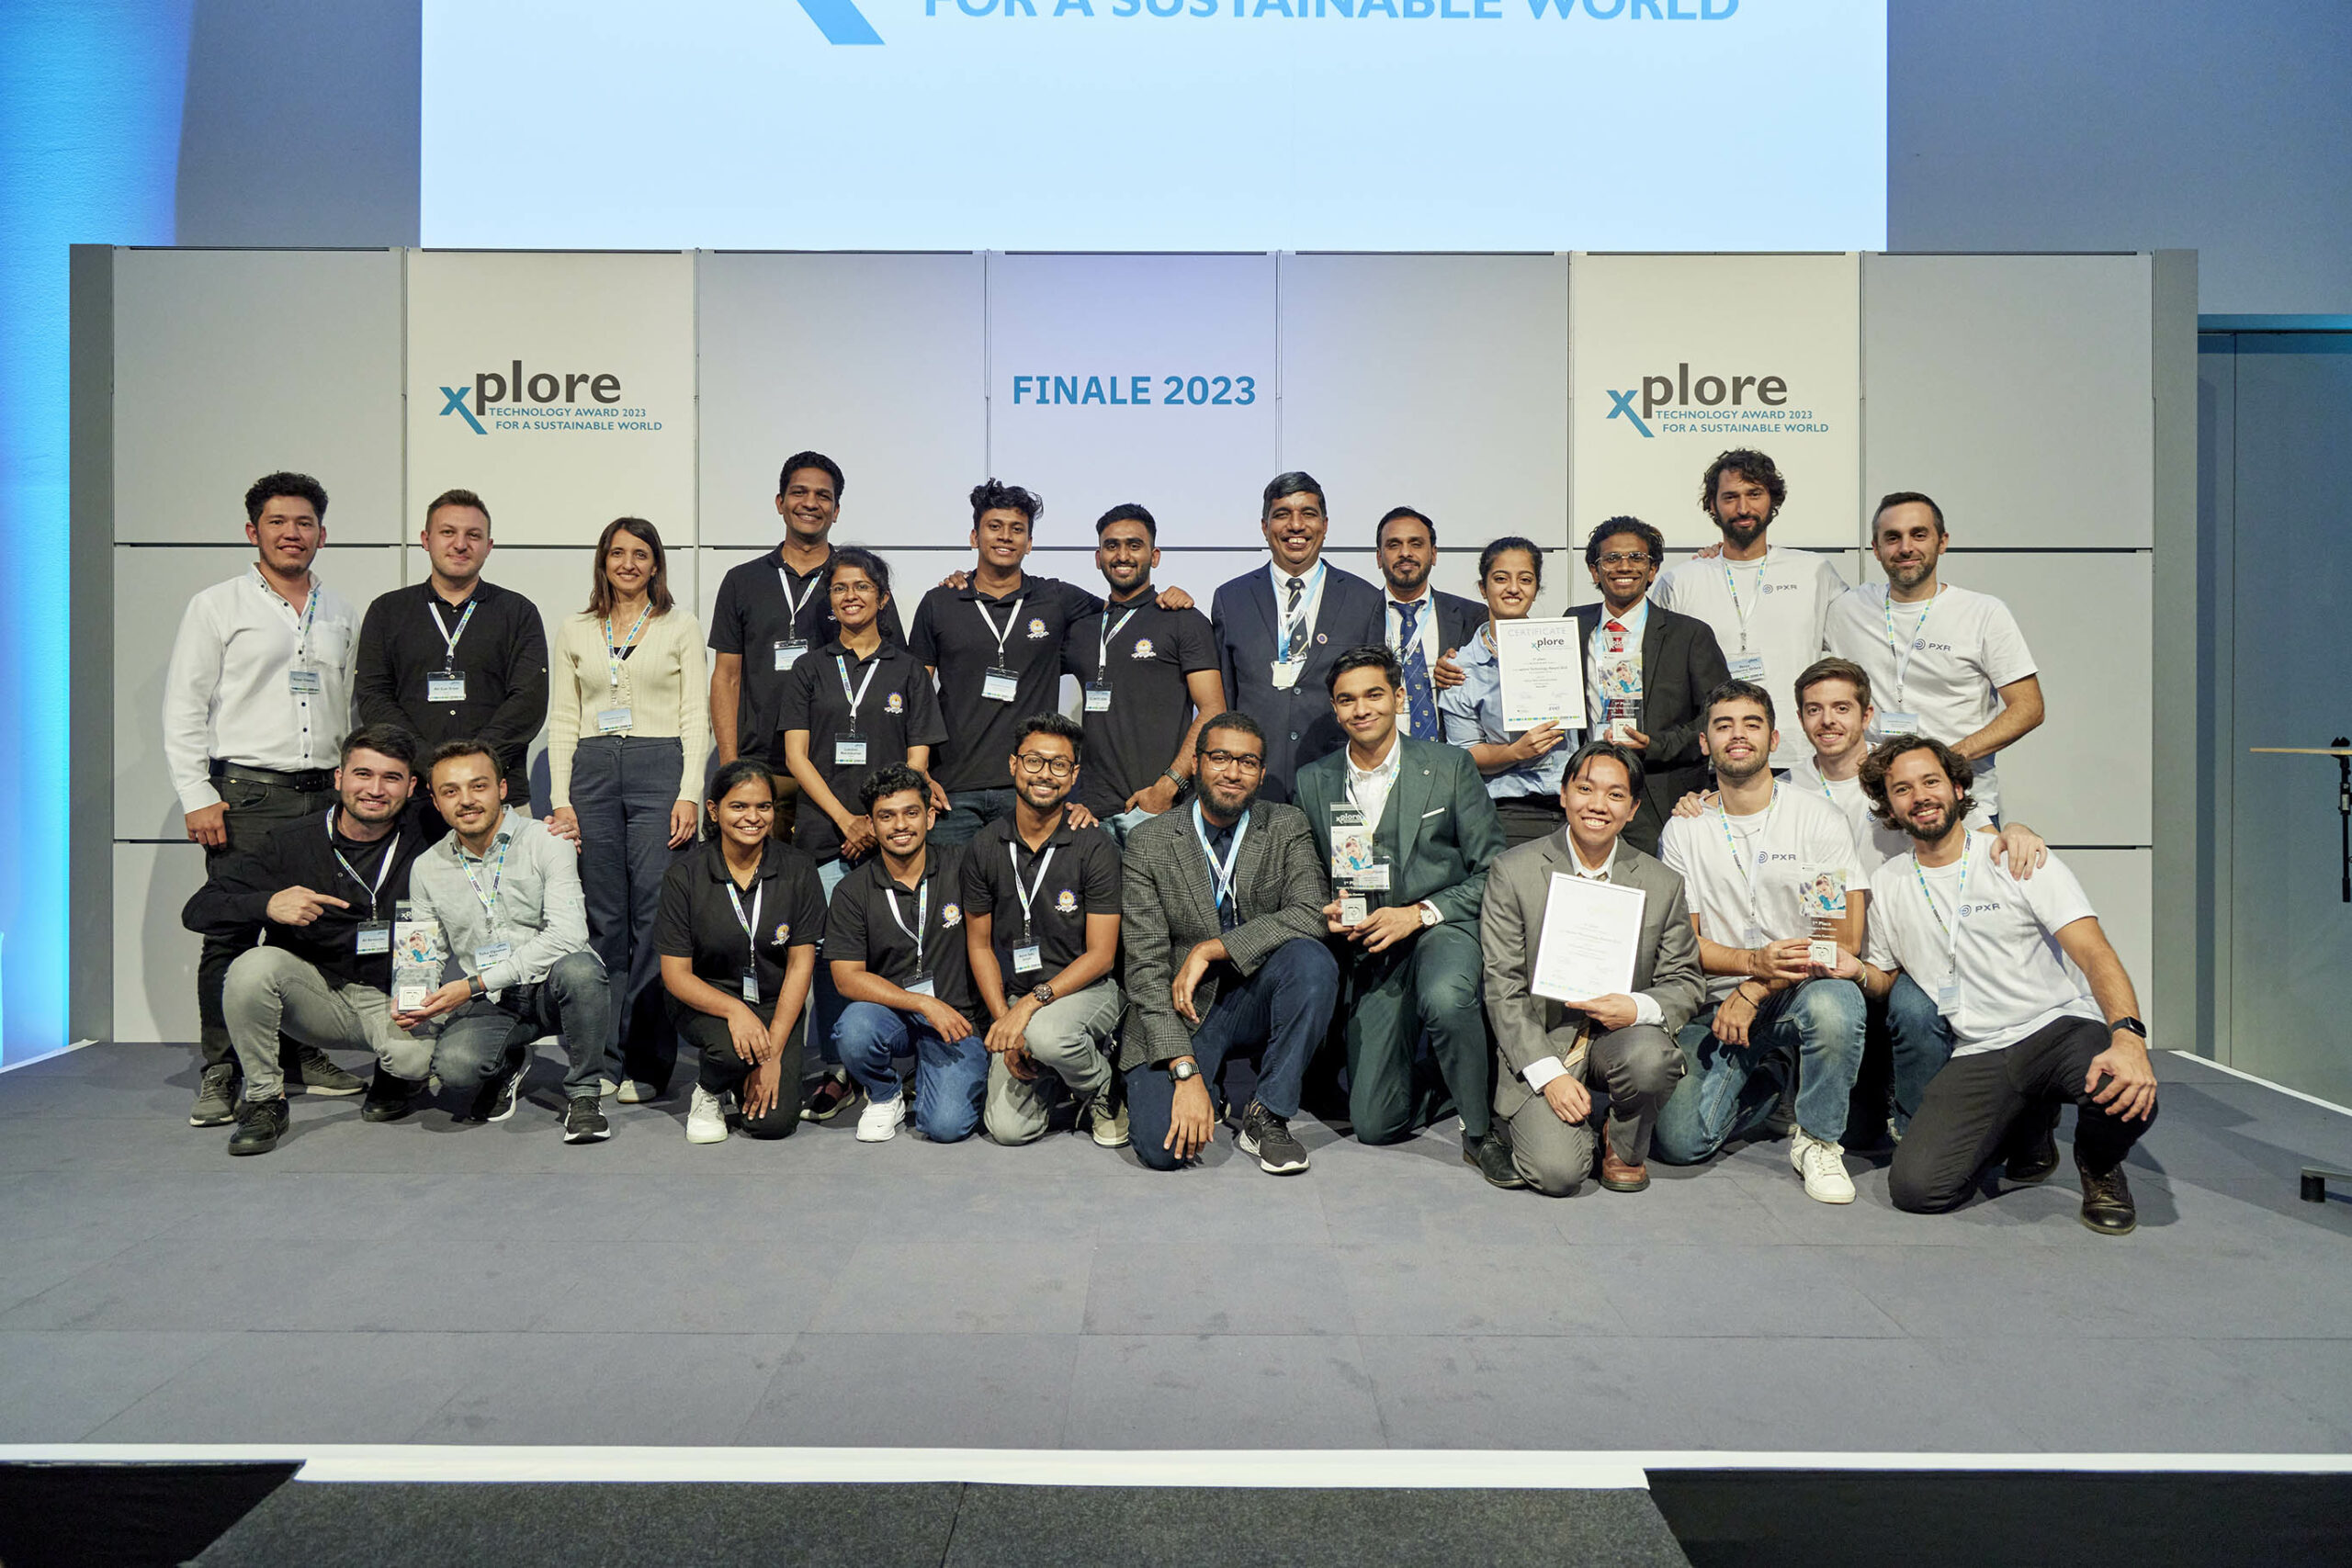 Here they are! The winners of the xplore 2023 Technology Award for a sustainable world